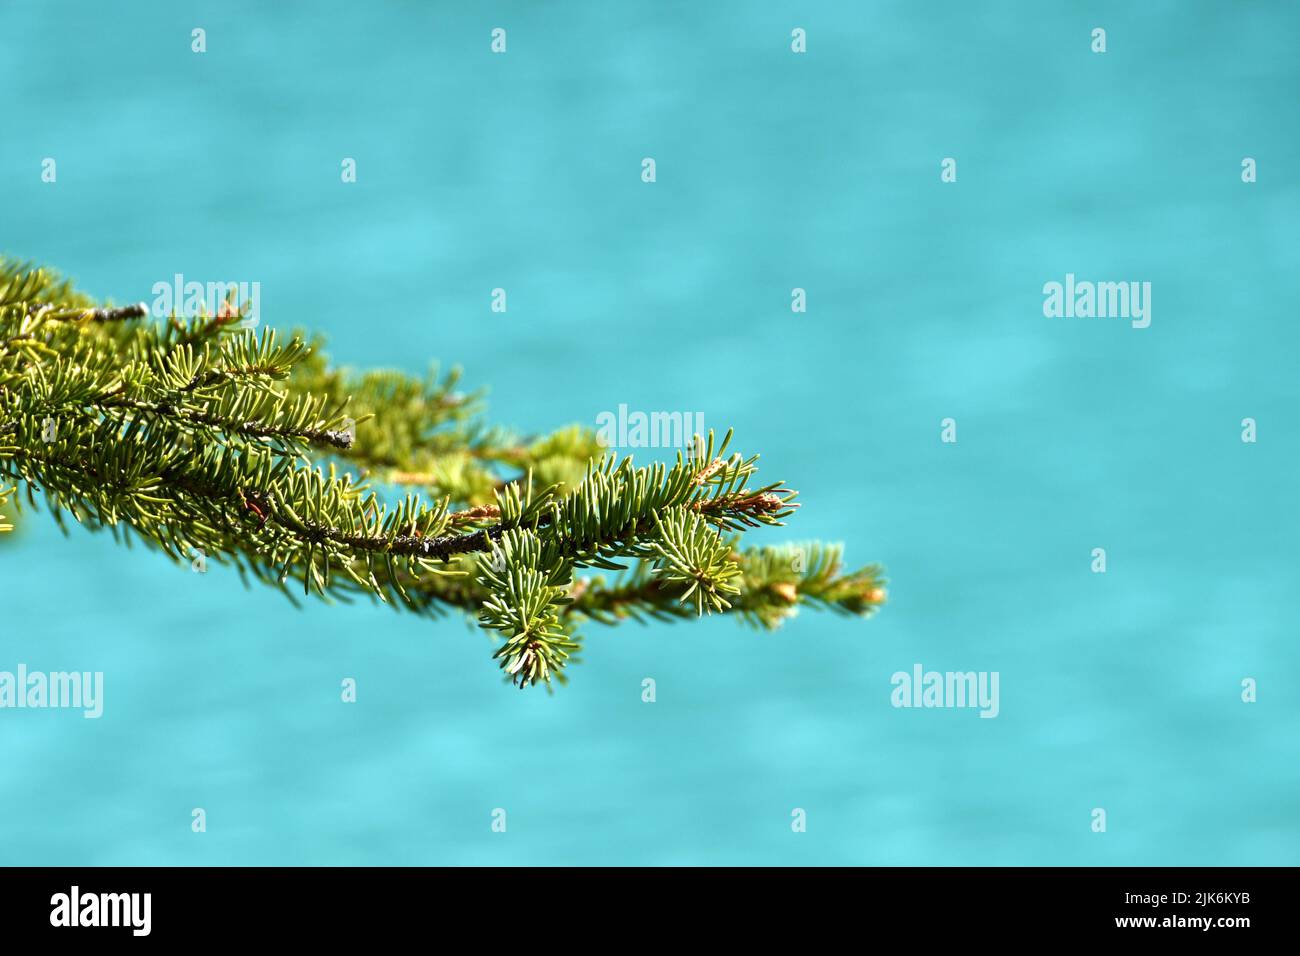 Close up view of needles on the branch of a pine tree, with plain defocussed background of turquoise blue water. No people, Copy space. Stock Photo